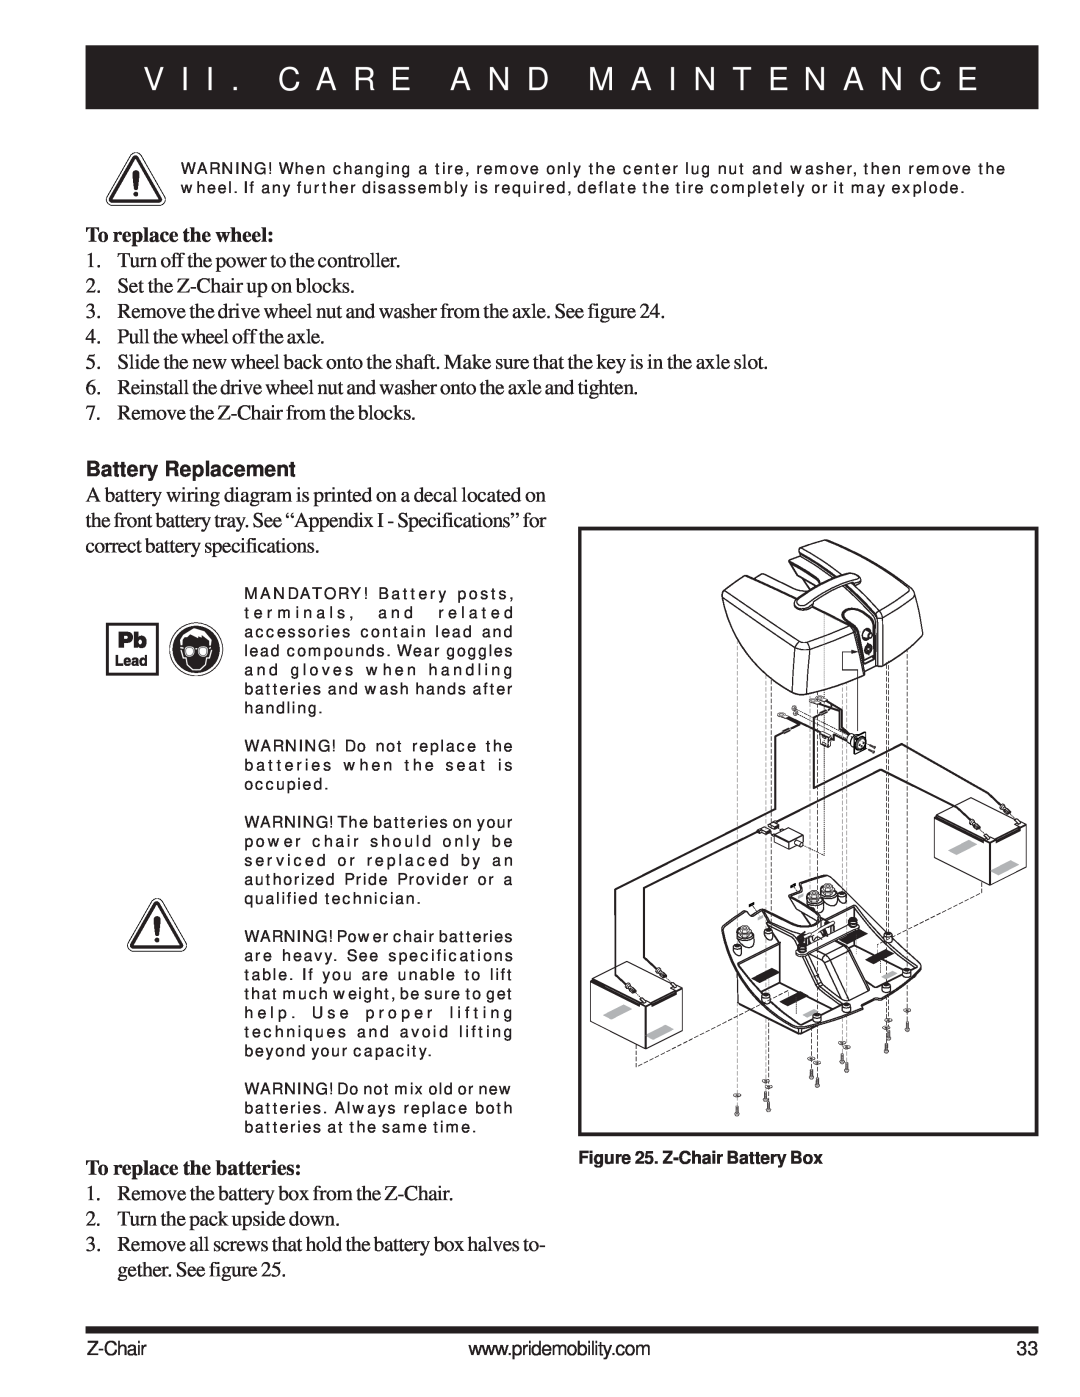 Pride Mobility INFMAN63121 manual To replace the wheel, Battery Replacement, To replace the batteries 